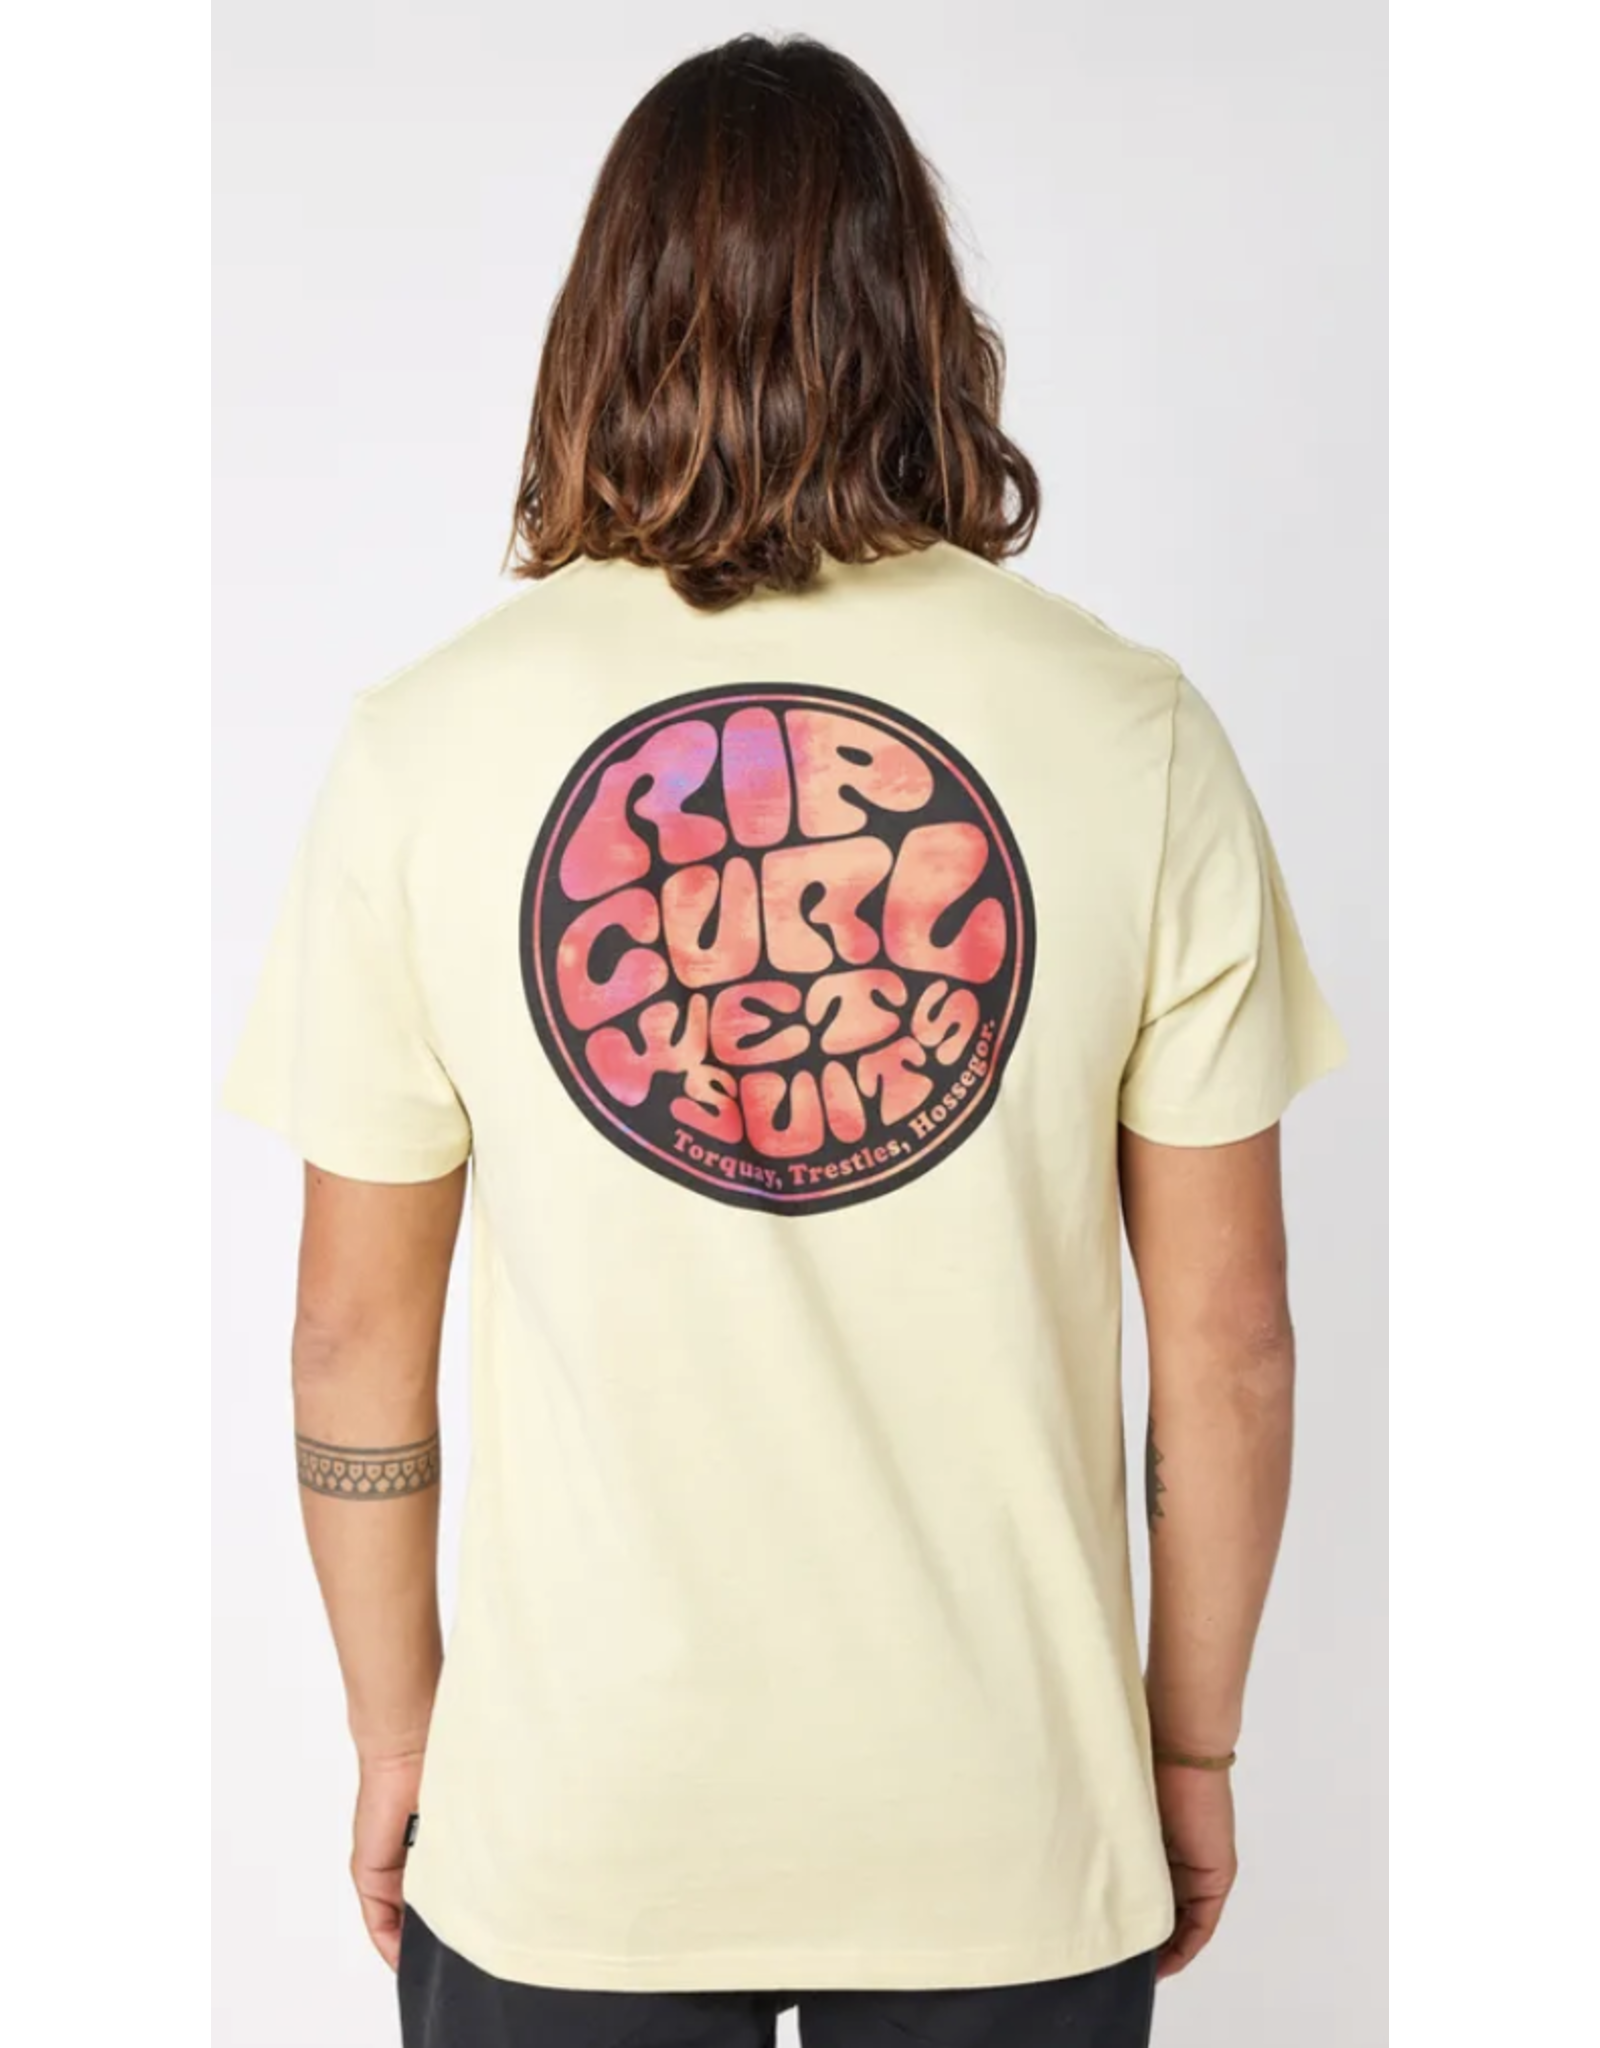 Rip Curl Rip Curl Wetsuit Passage Tee Yellow